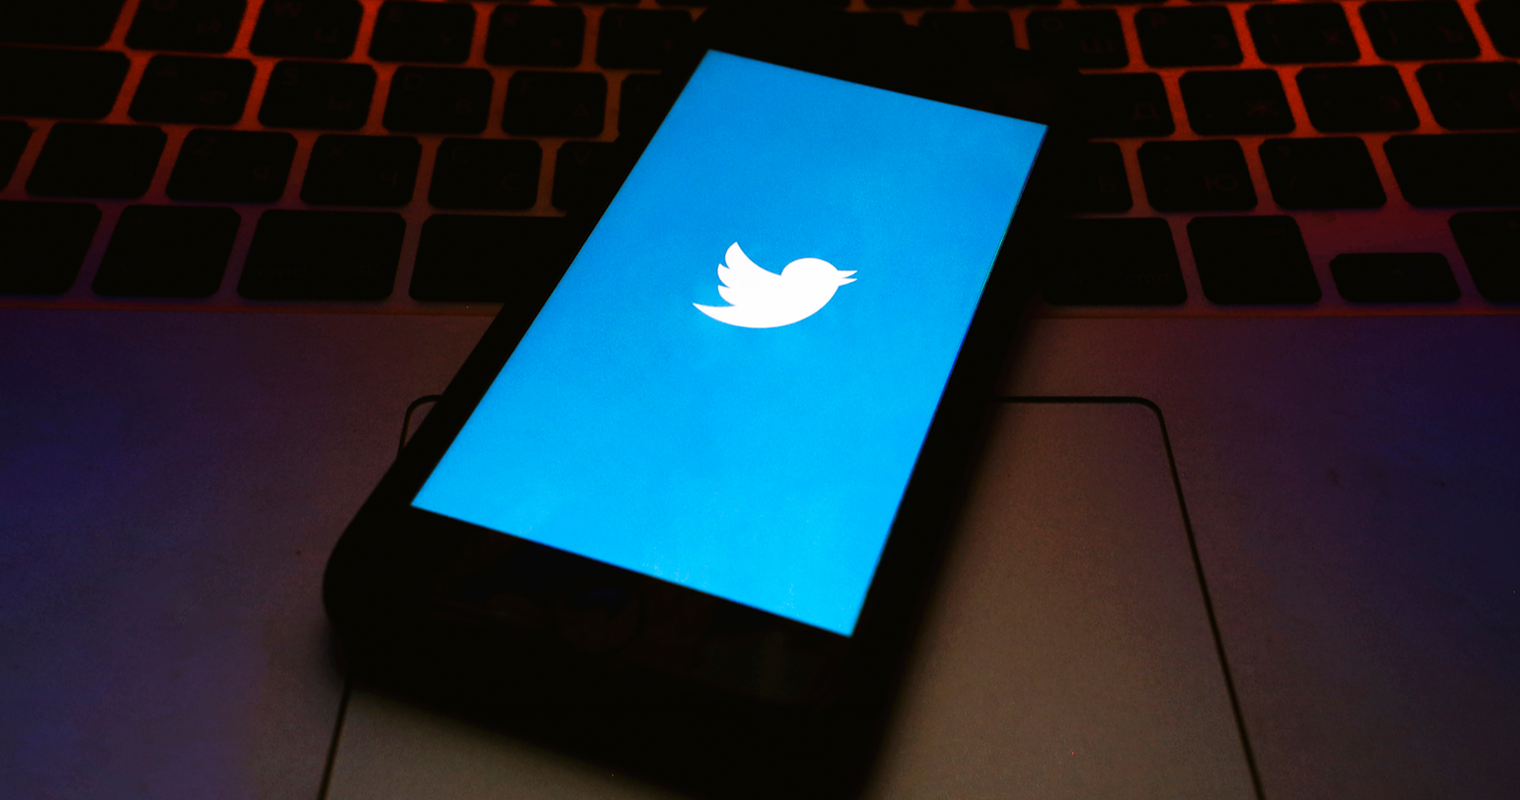 Twitter’s ‘Hide Replies’ Feature is Set to Roll Out in June